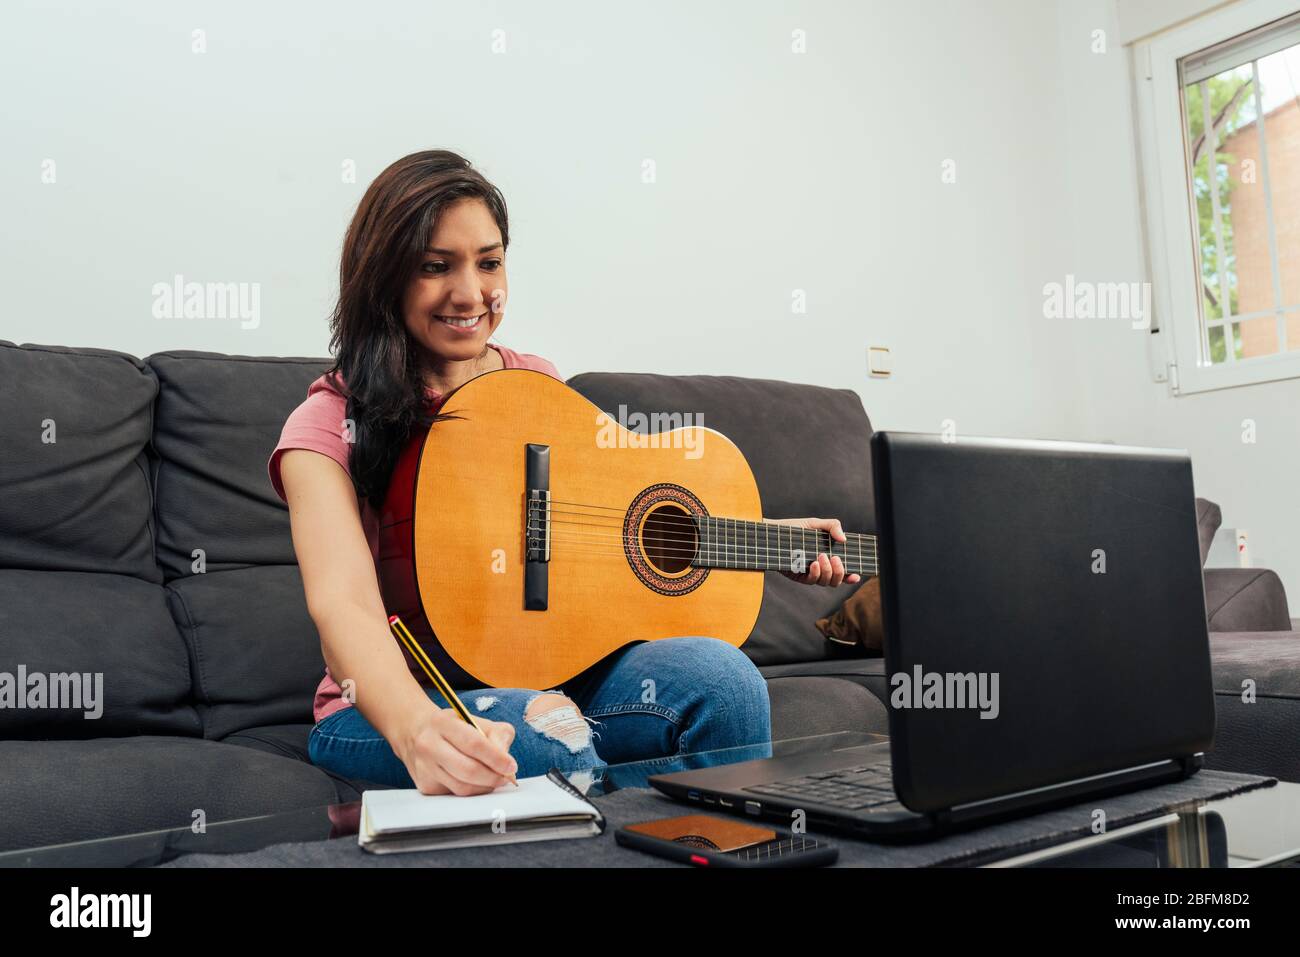 Woman taking guitar lesson notes online. Online learning concept. Stock Photo